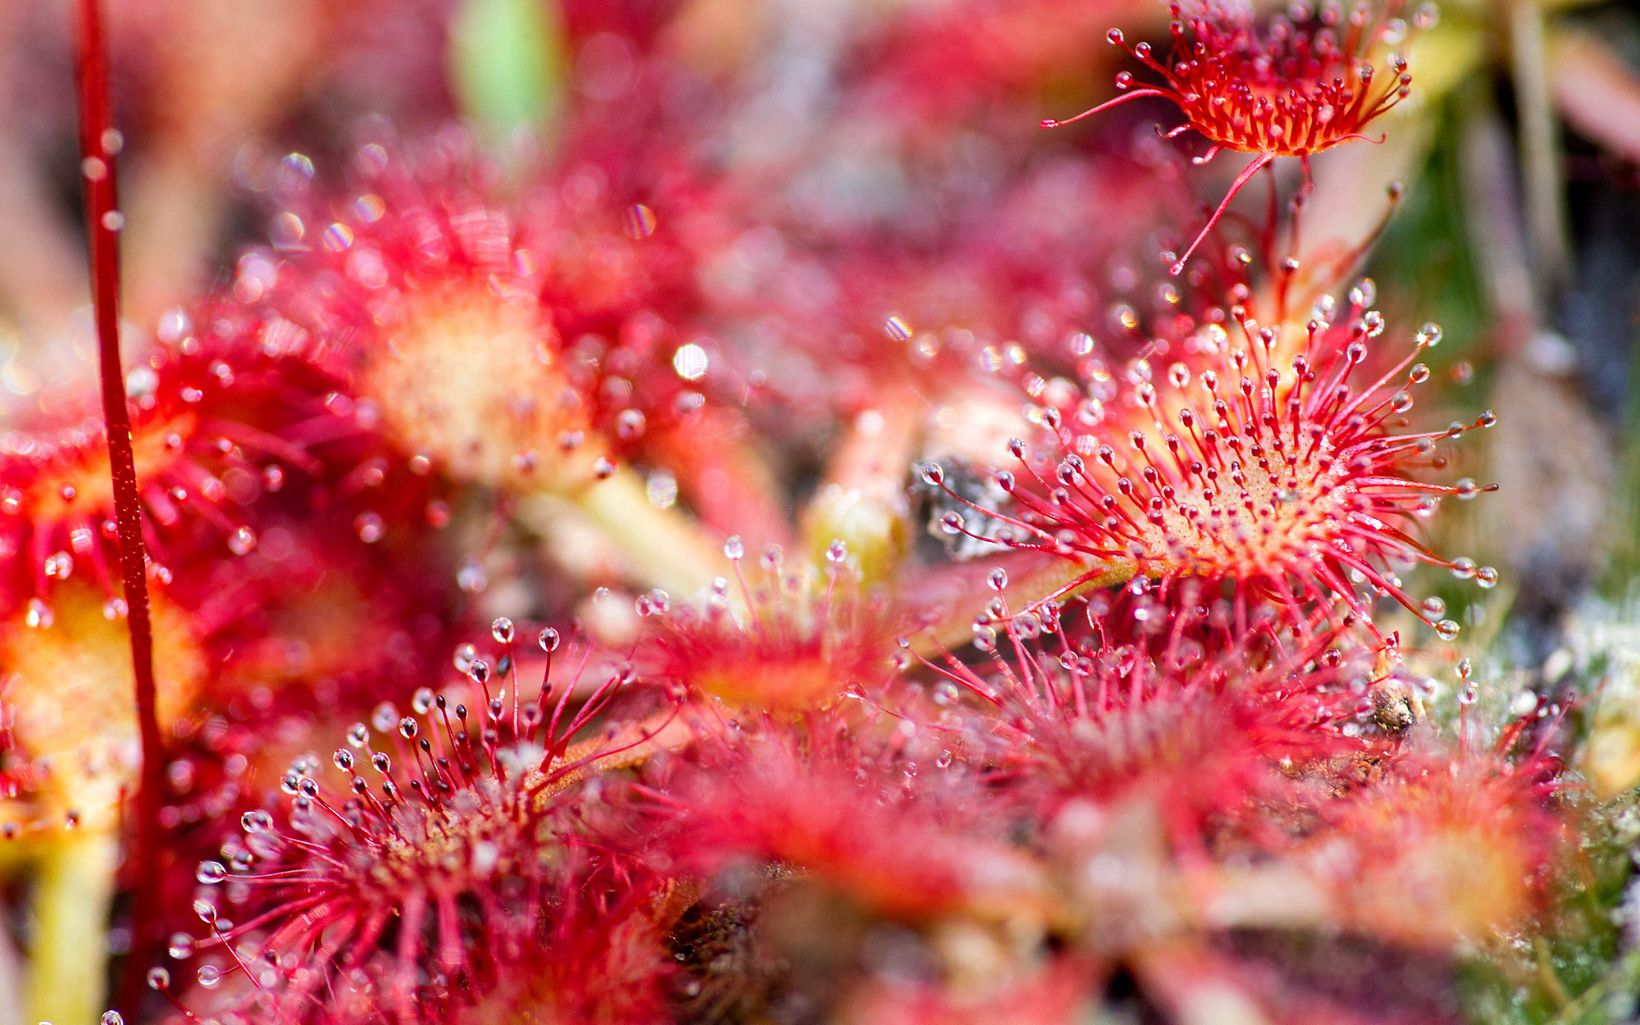 Sundews Sundews, which measure no more than 1 inch across, capture insects on their gooey tentacles, Shaken Creek, North Carolina.   © Christian Ziegler